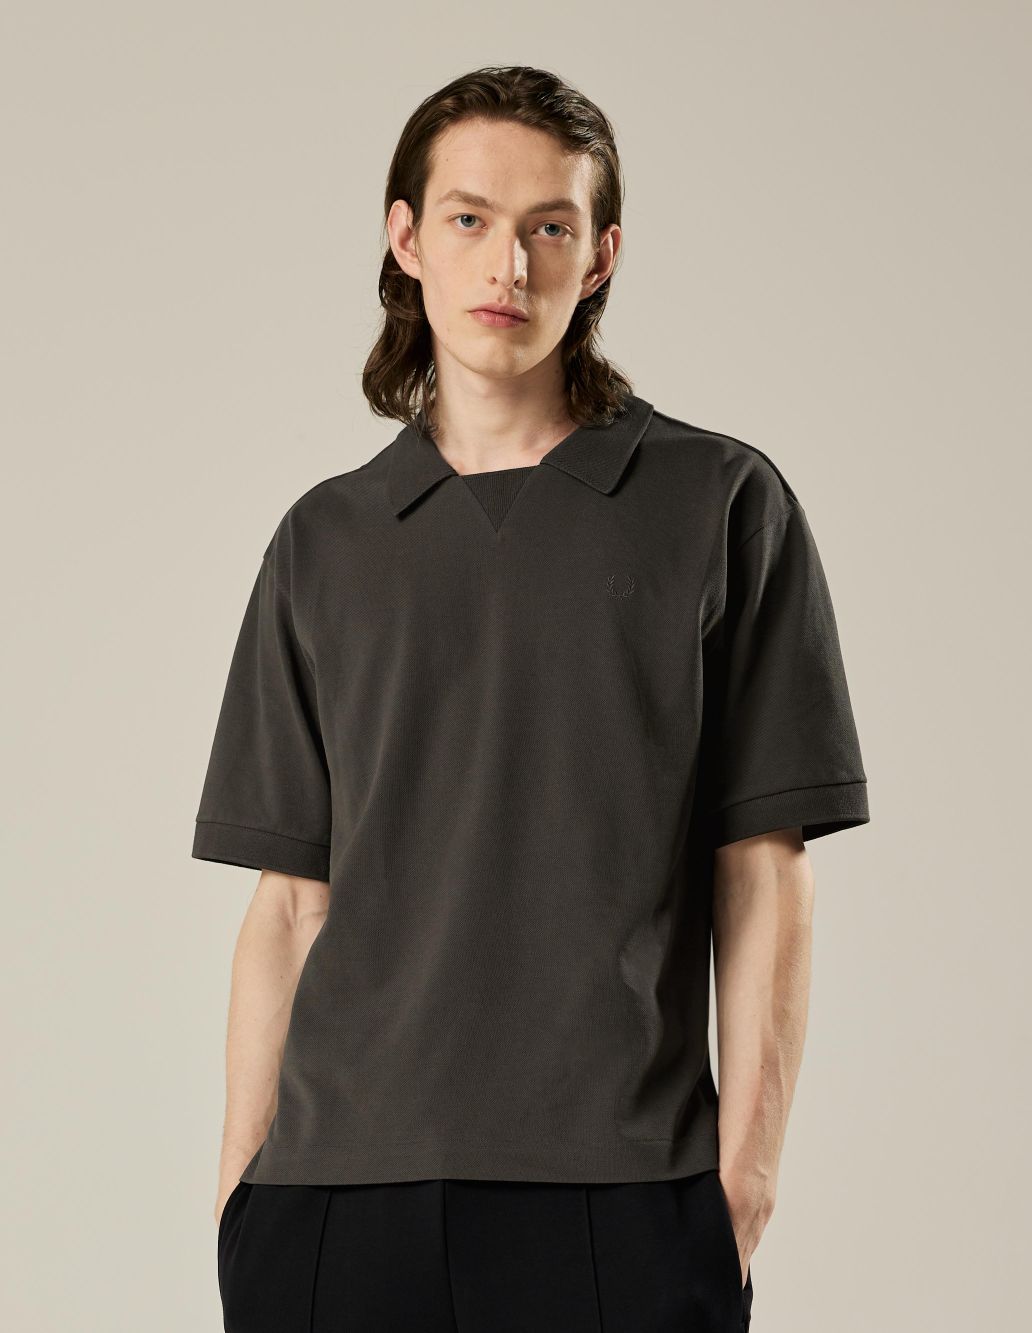 FRED PERRY MARGARET HOWELL PIQUE POLO S | kensysgas.com